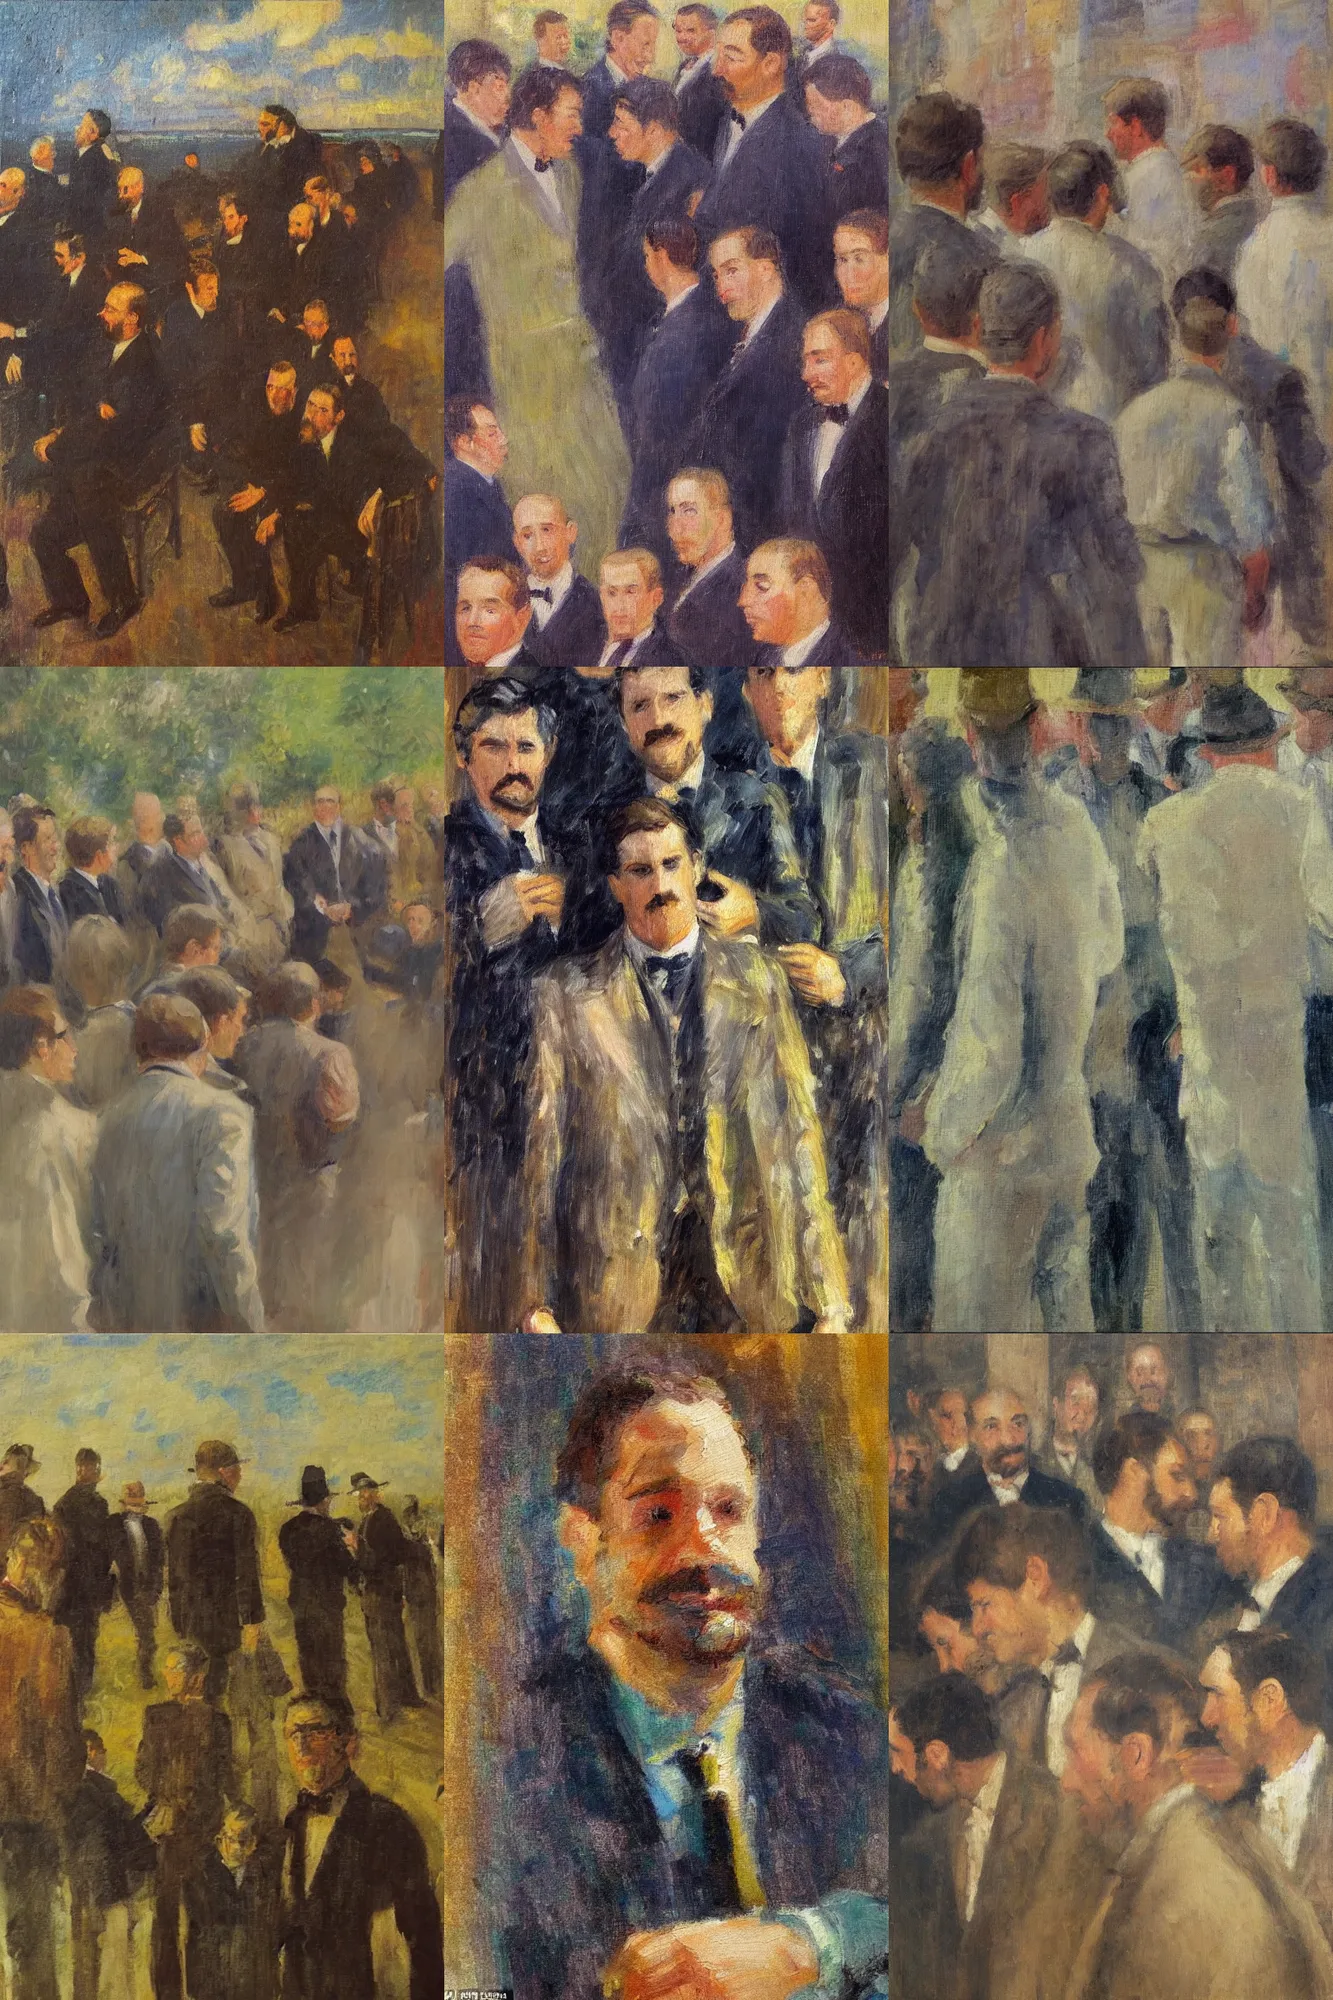 Prompt: An impressionist oil painting of a man behind a man behind a man behind a man behind a man behind a man behind a man behind a man behind a man behind a man behind a man behind a man behind a man in a straight line